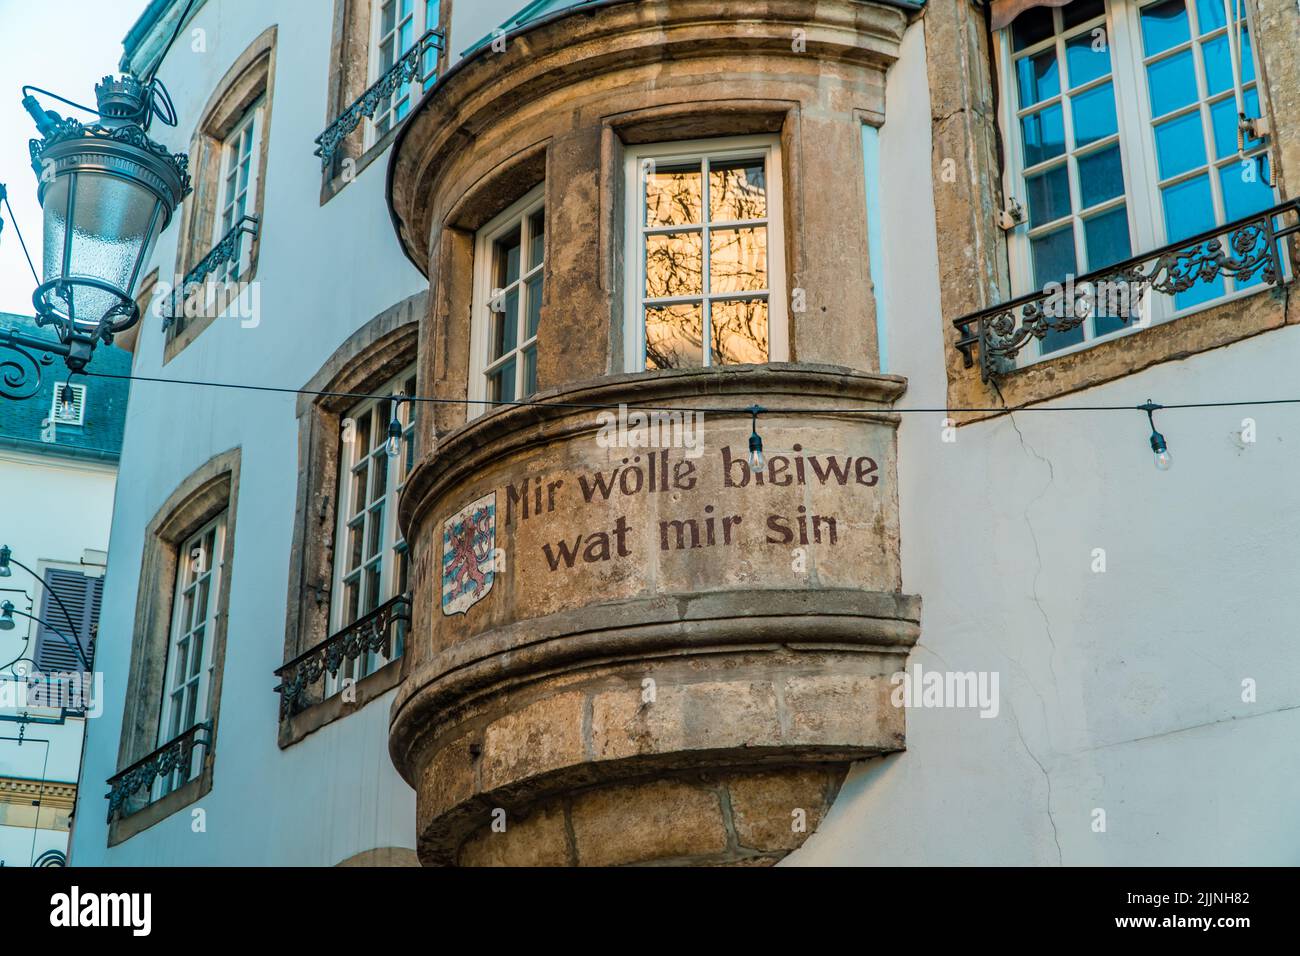 A Luxembourg national motto - we want to remain what we area on medieval houses Stock Photo